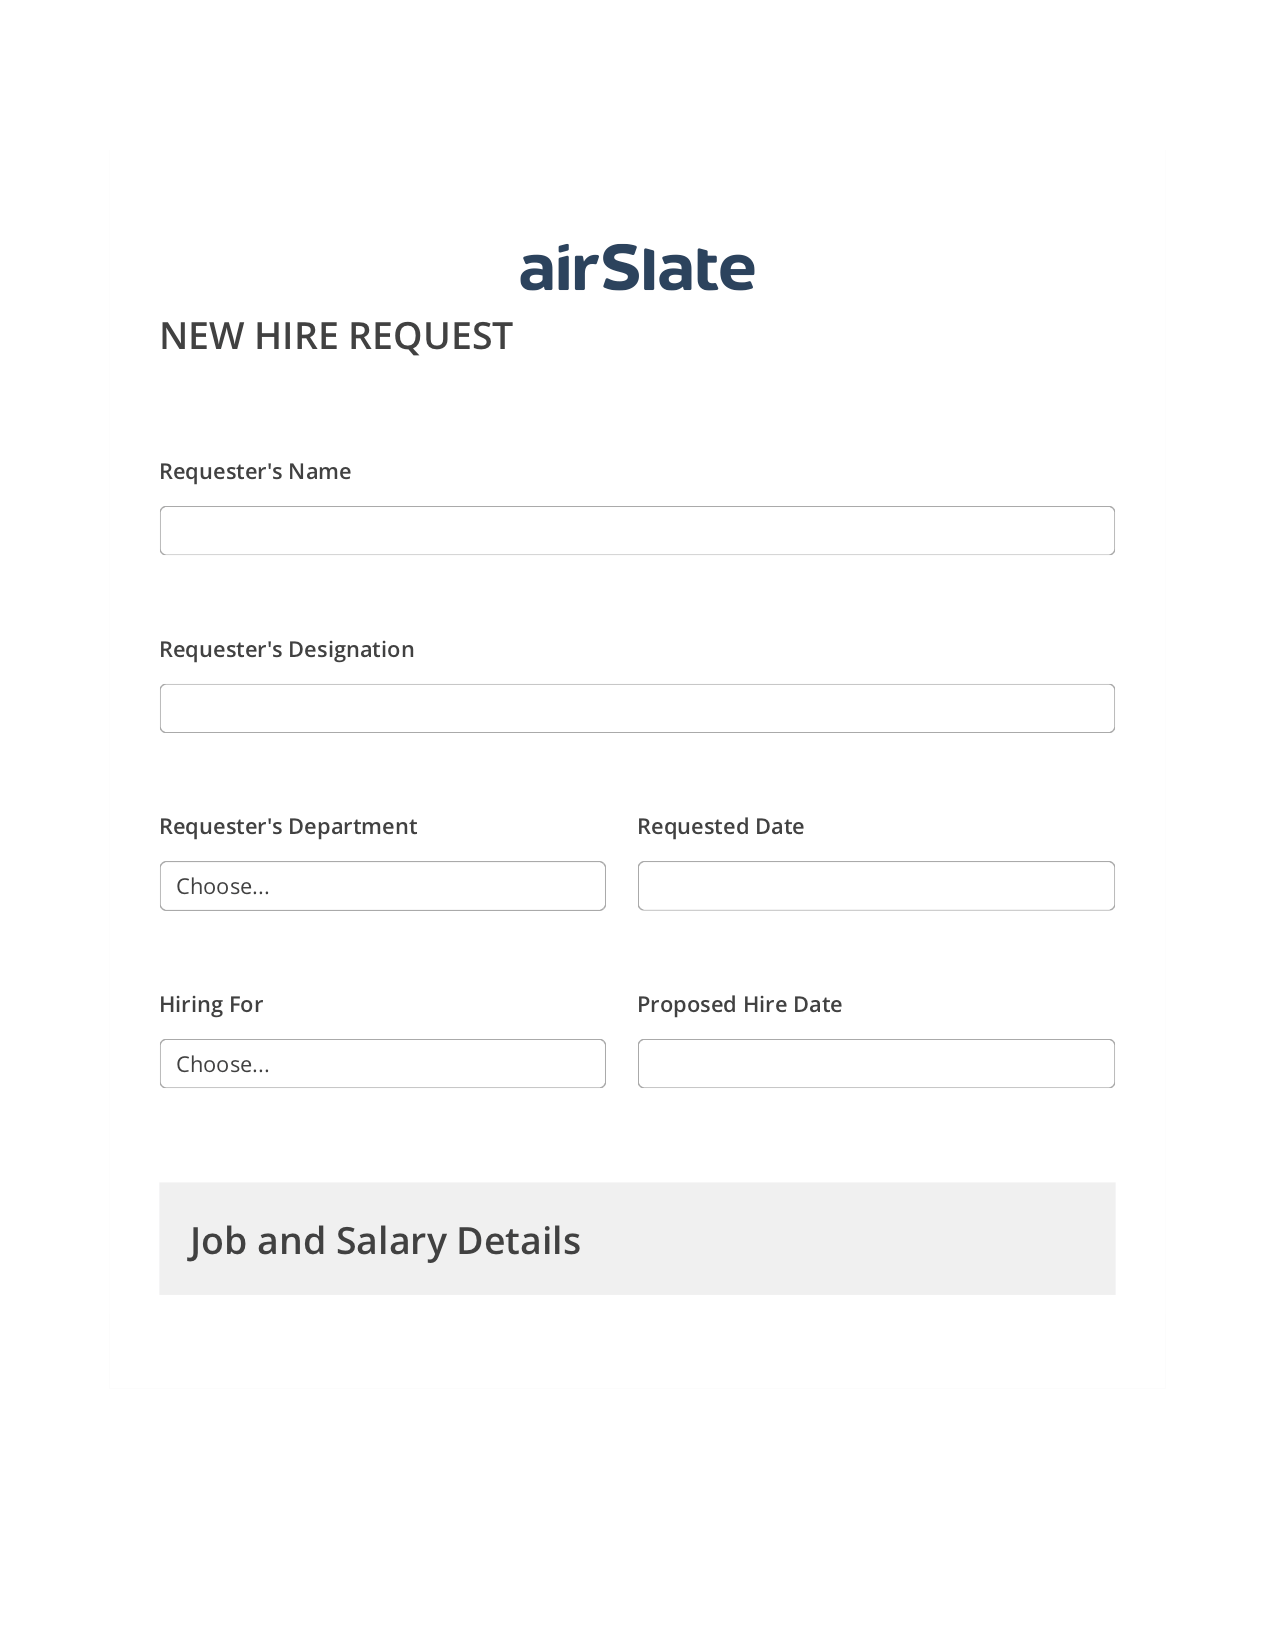 Hiring Request Workflow Pre-fill from MS Dynamics 365 Records, Remove Tags From Slate Bot, Export to Salesforce Record Bot